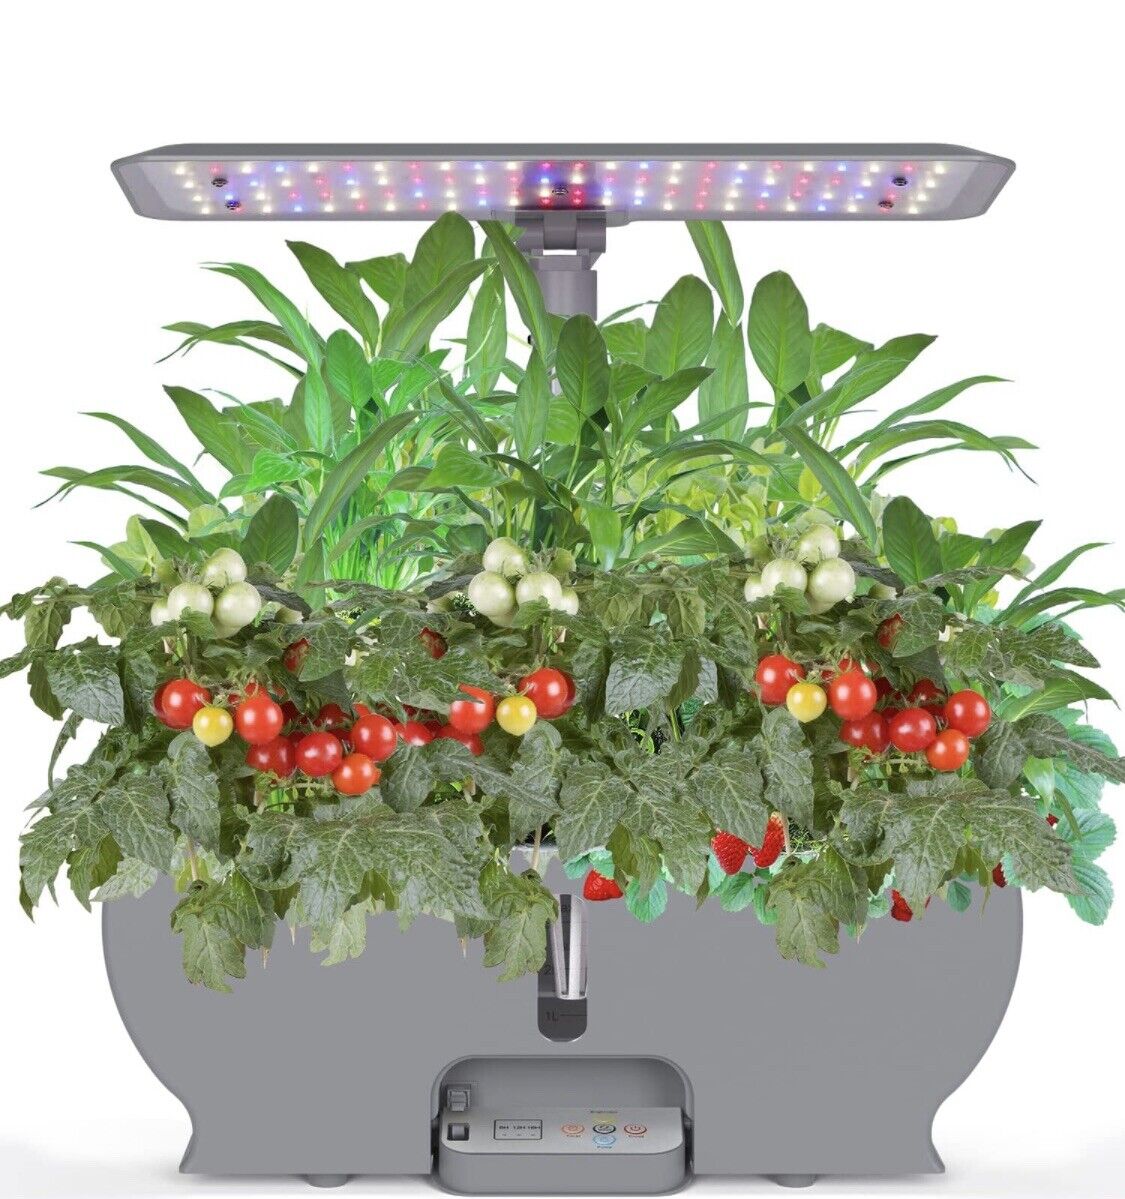 Wattne 9Pods Hydroponics Growing System with LED Grow Light for Home & Kitchen